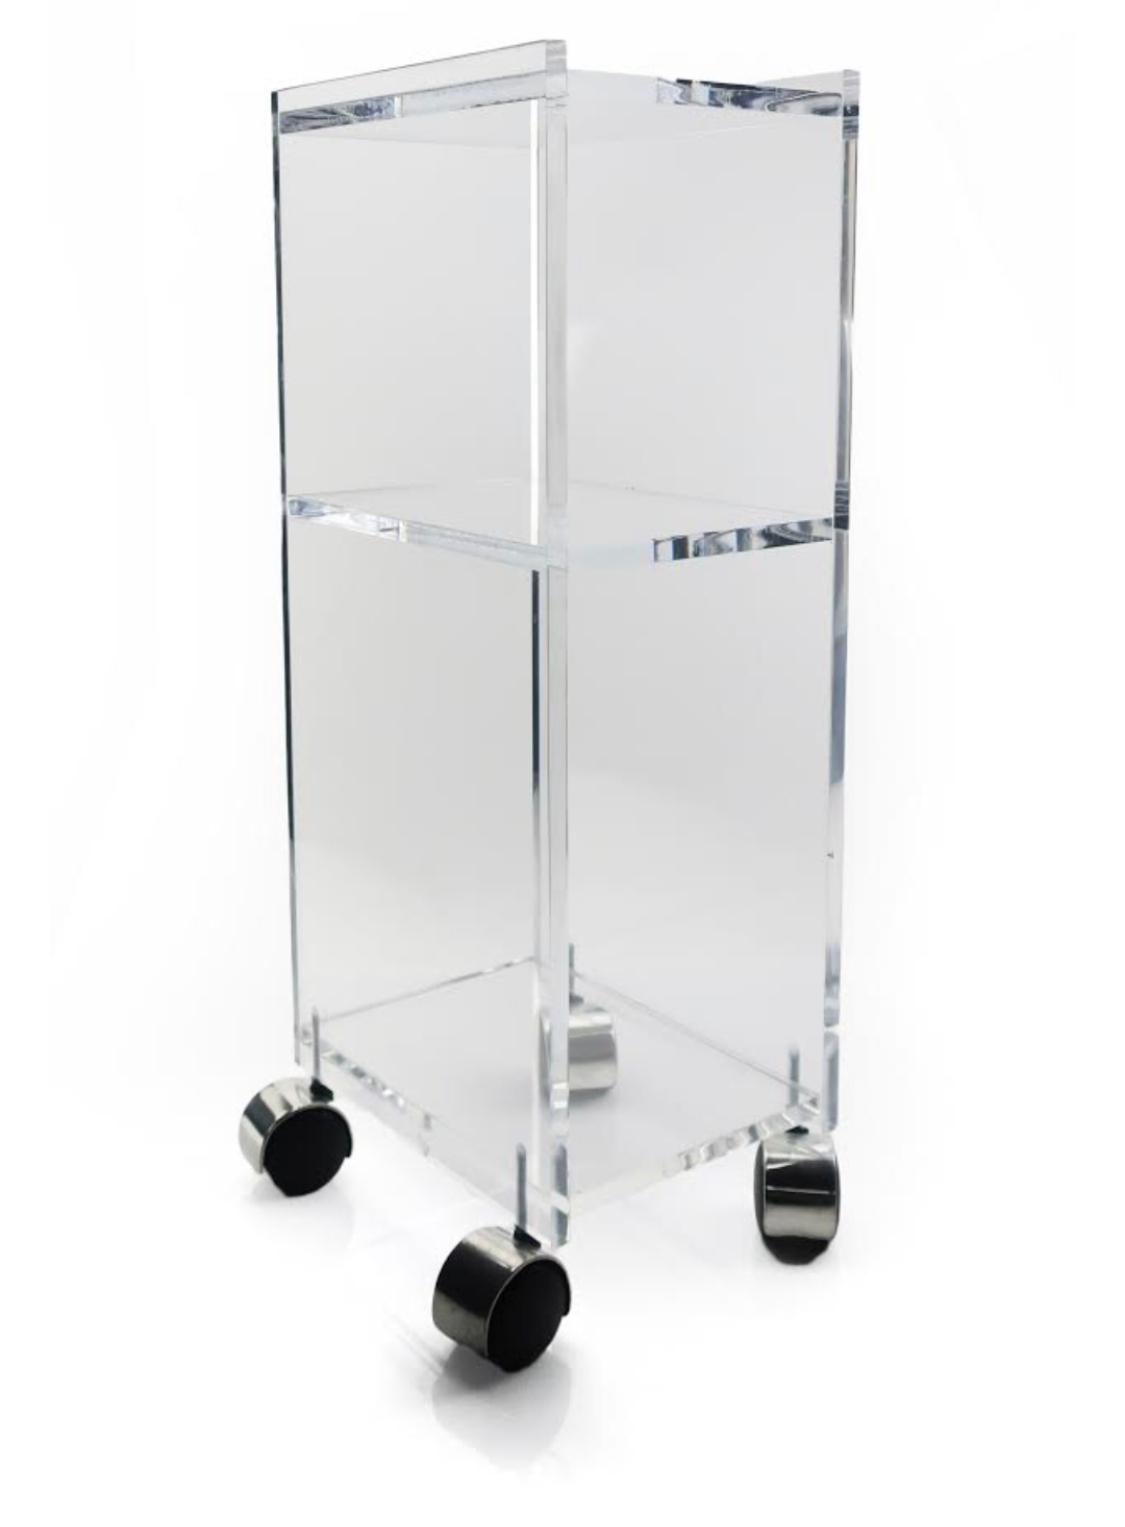 A perfect three shelf Lucite cart on casters. In excellent vintage condition.

Measures: 8